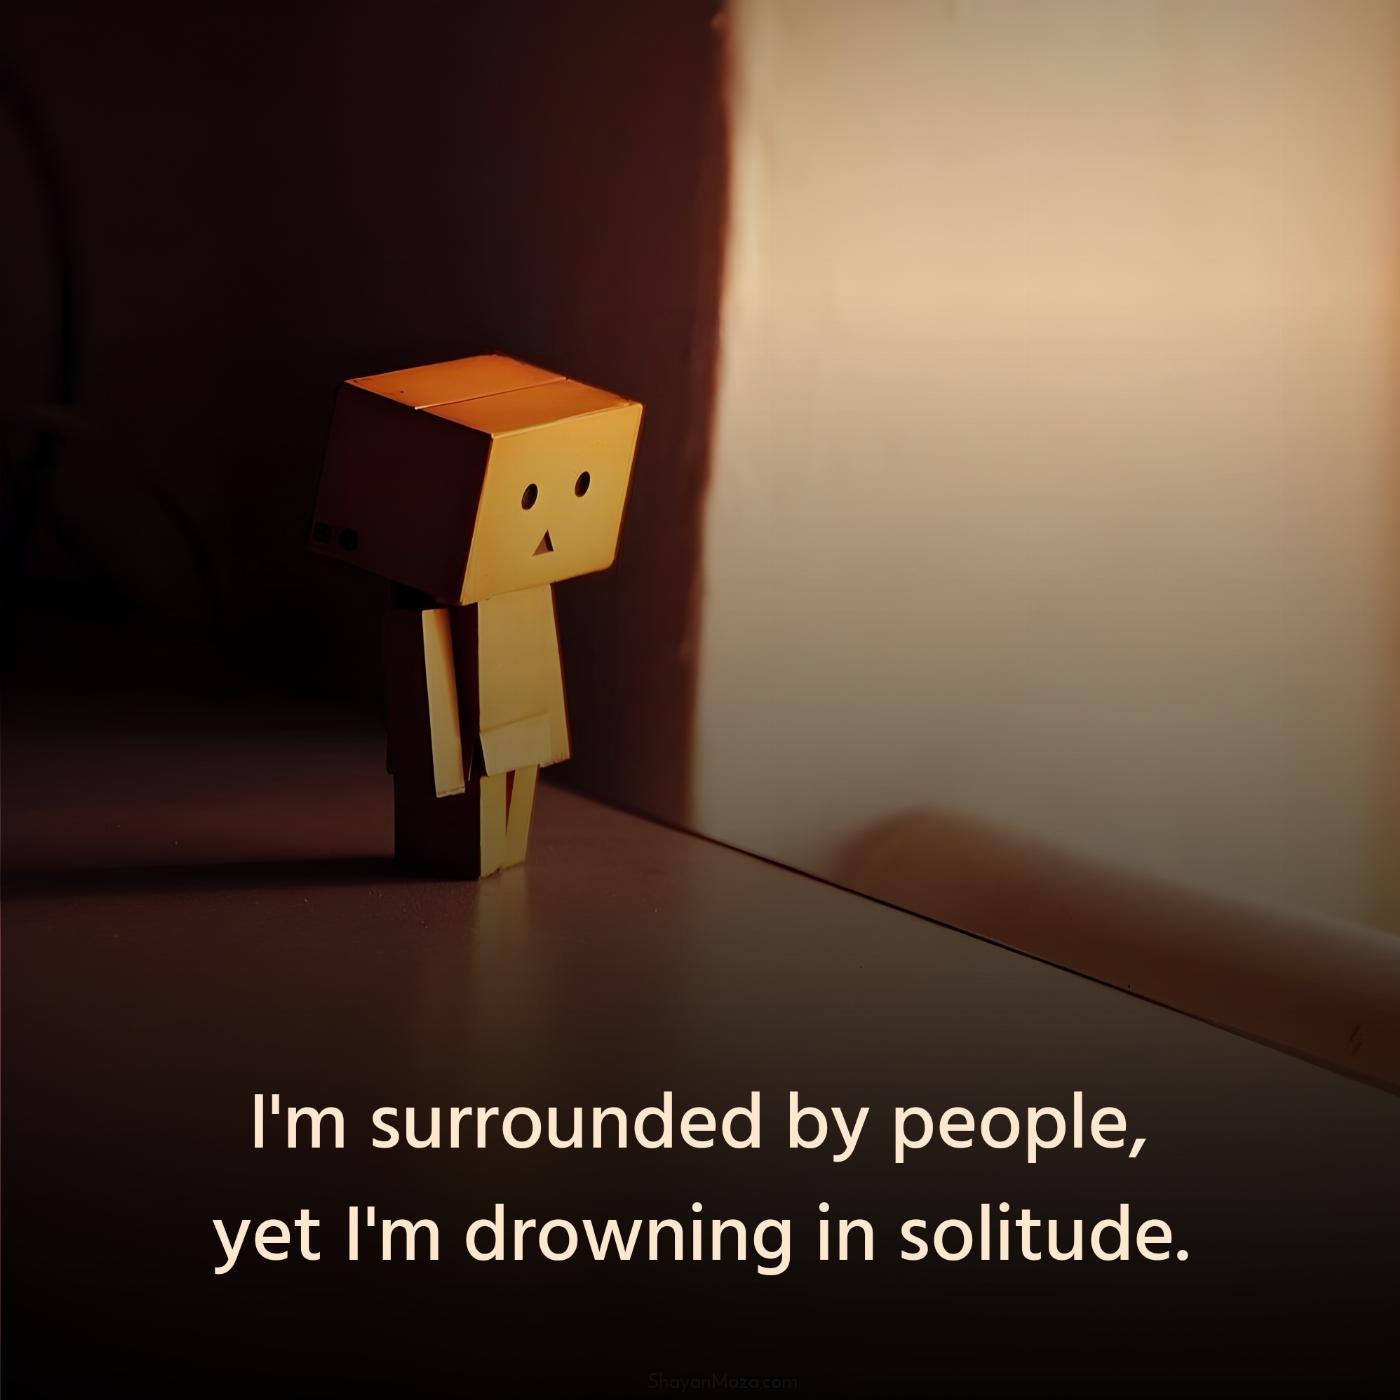 I'm surrounded by people yet I'm drowning in solitude